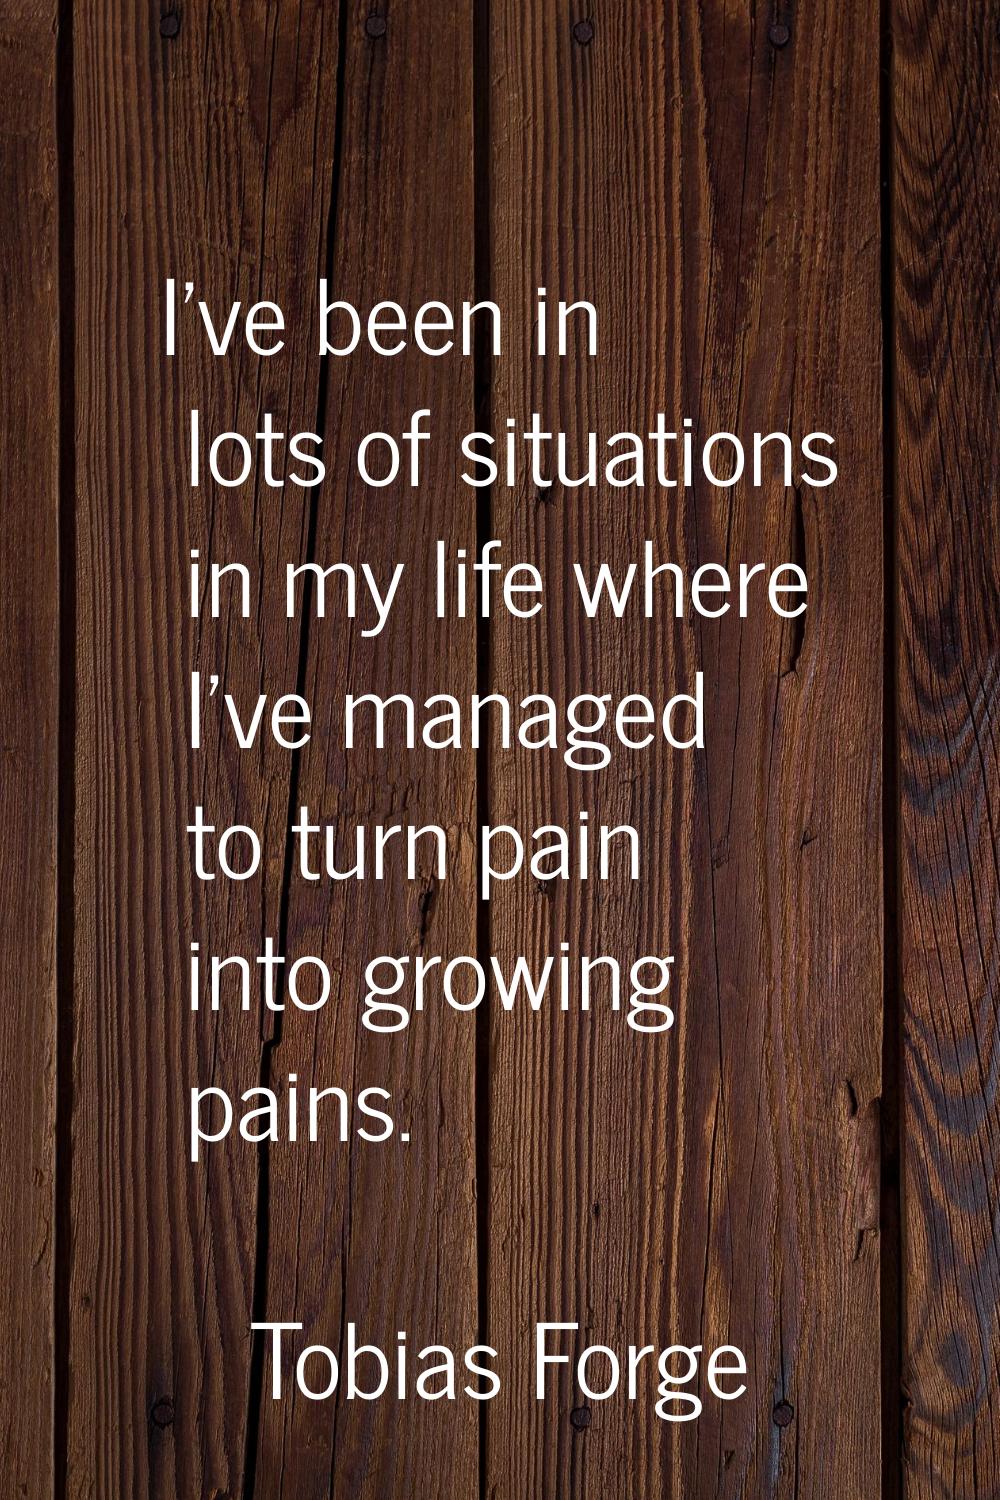 I've been in lots of situations in my life where I've managed to turn pain into growing pains.